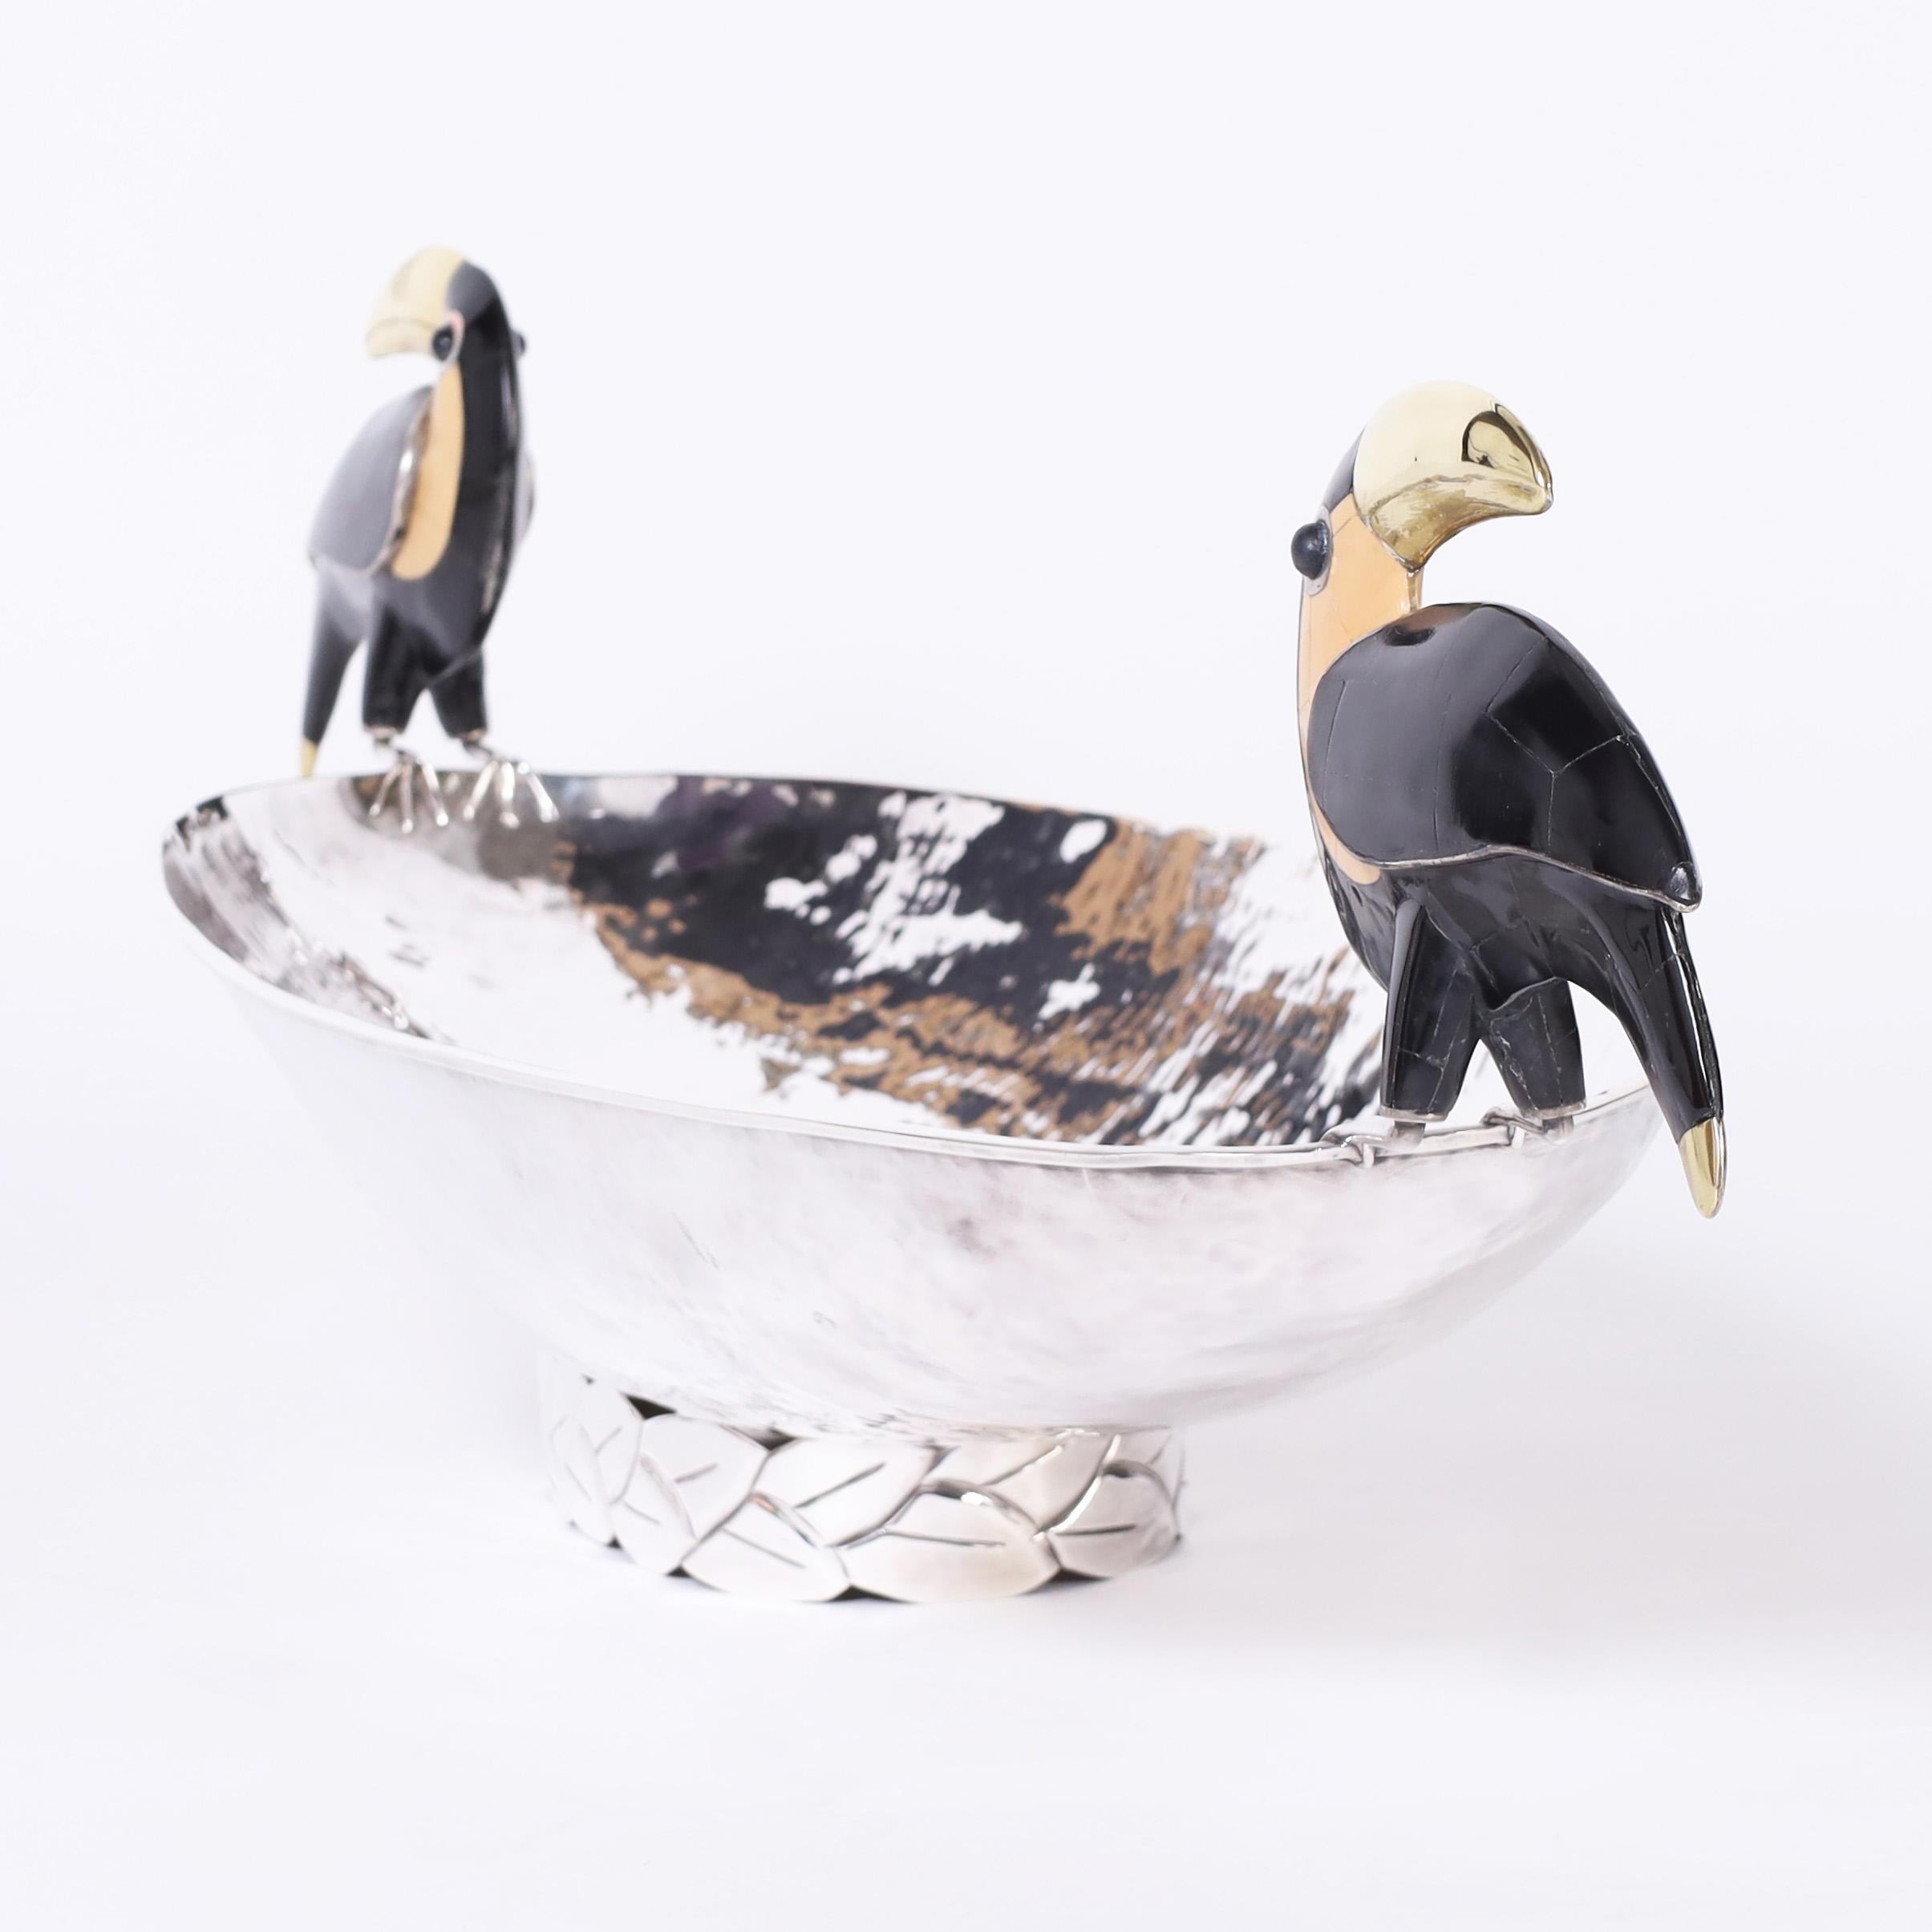 Striking Mid Century Art Deco style long bowl handcrafted in silver plate over hammered copper in dramatic form having two stone clad toucans as handles and stylized deco foot. Signed Emilia Castillo on the bottom.